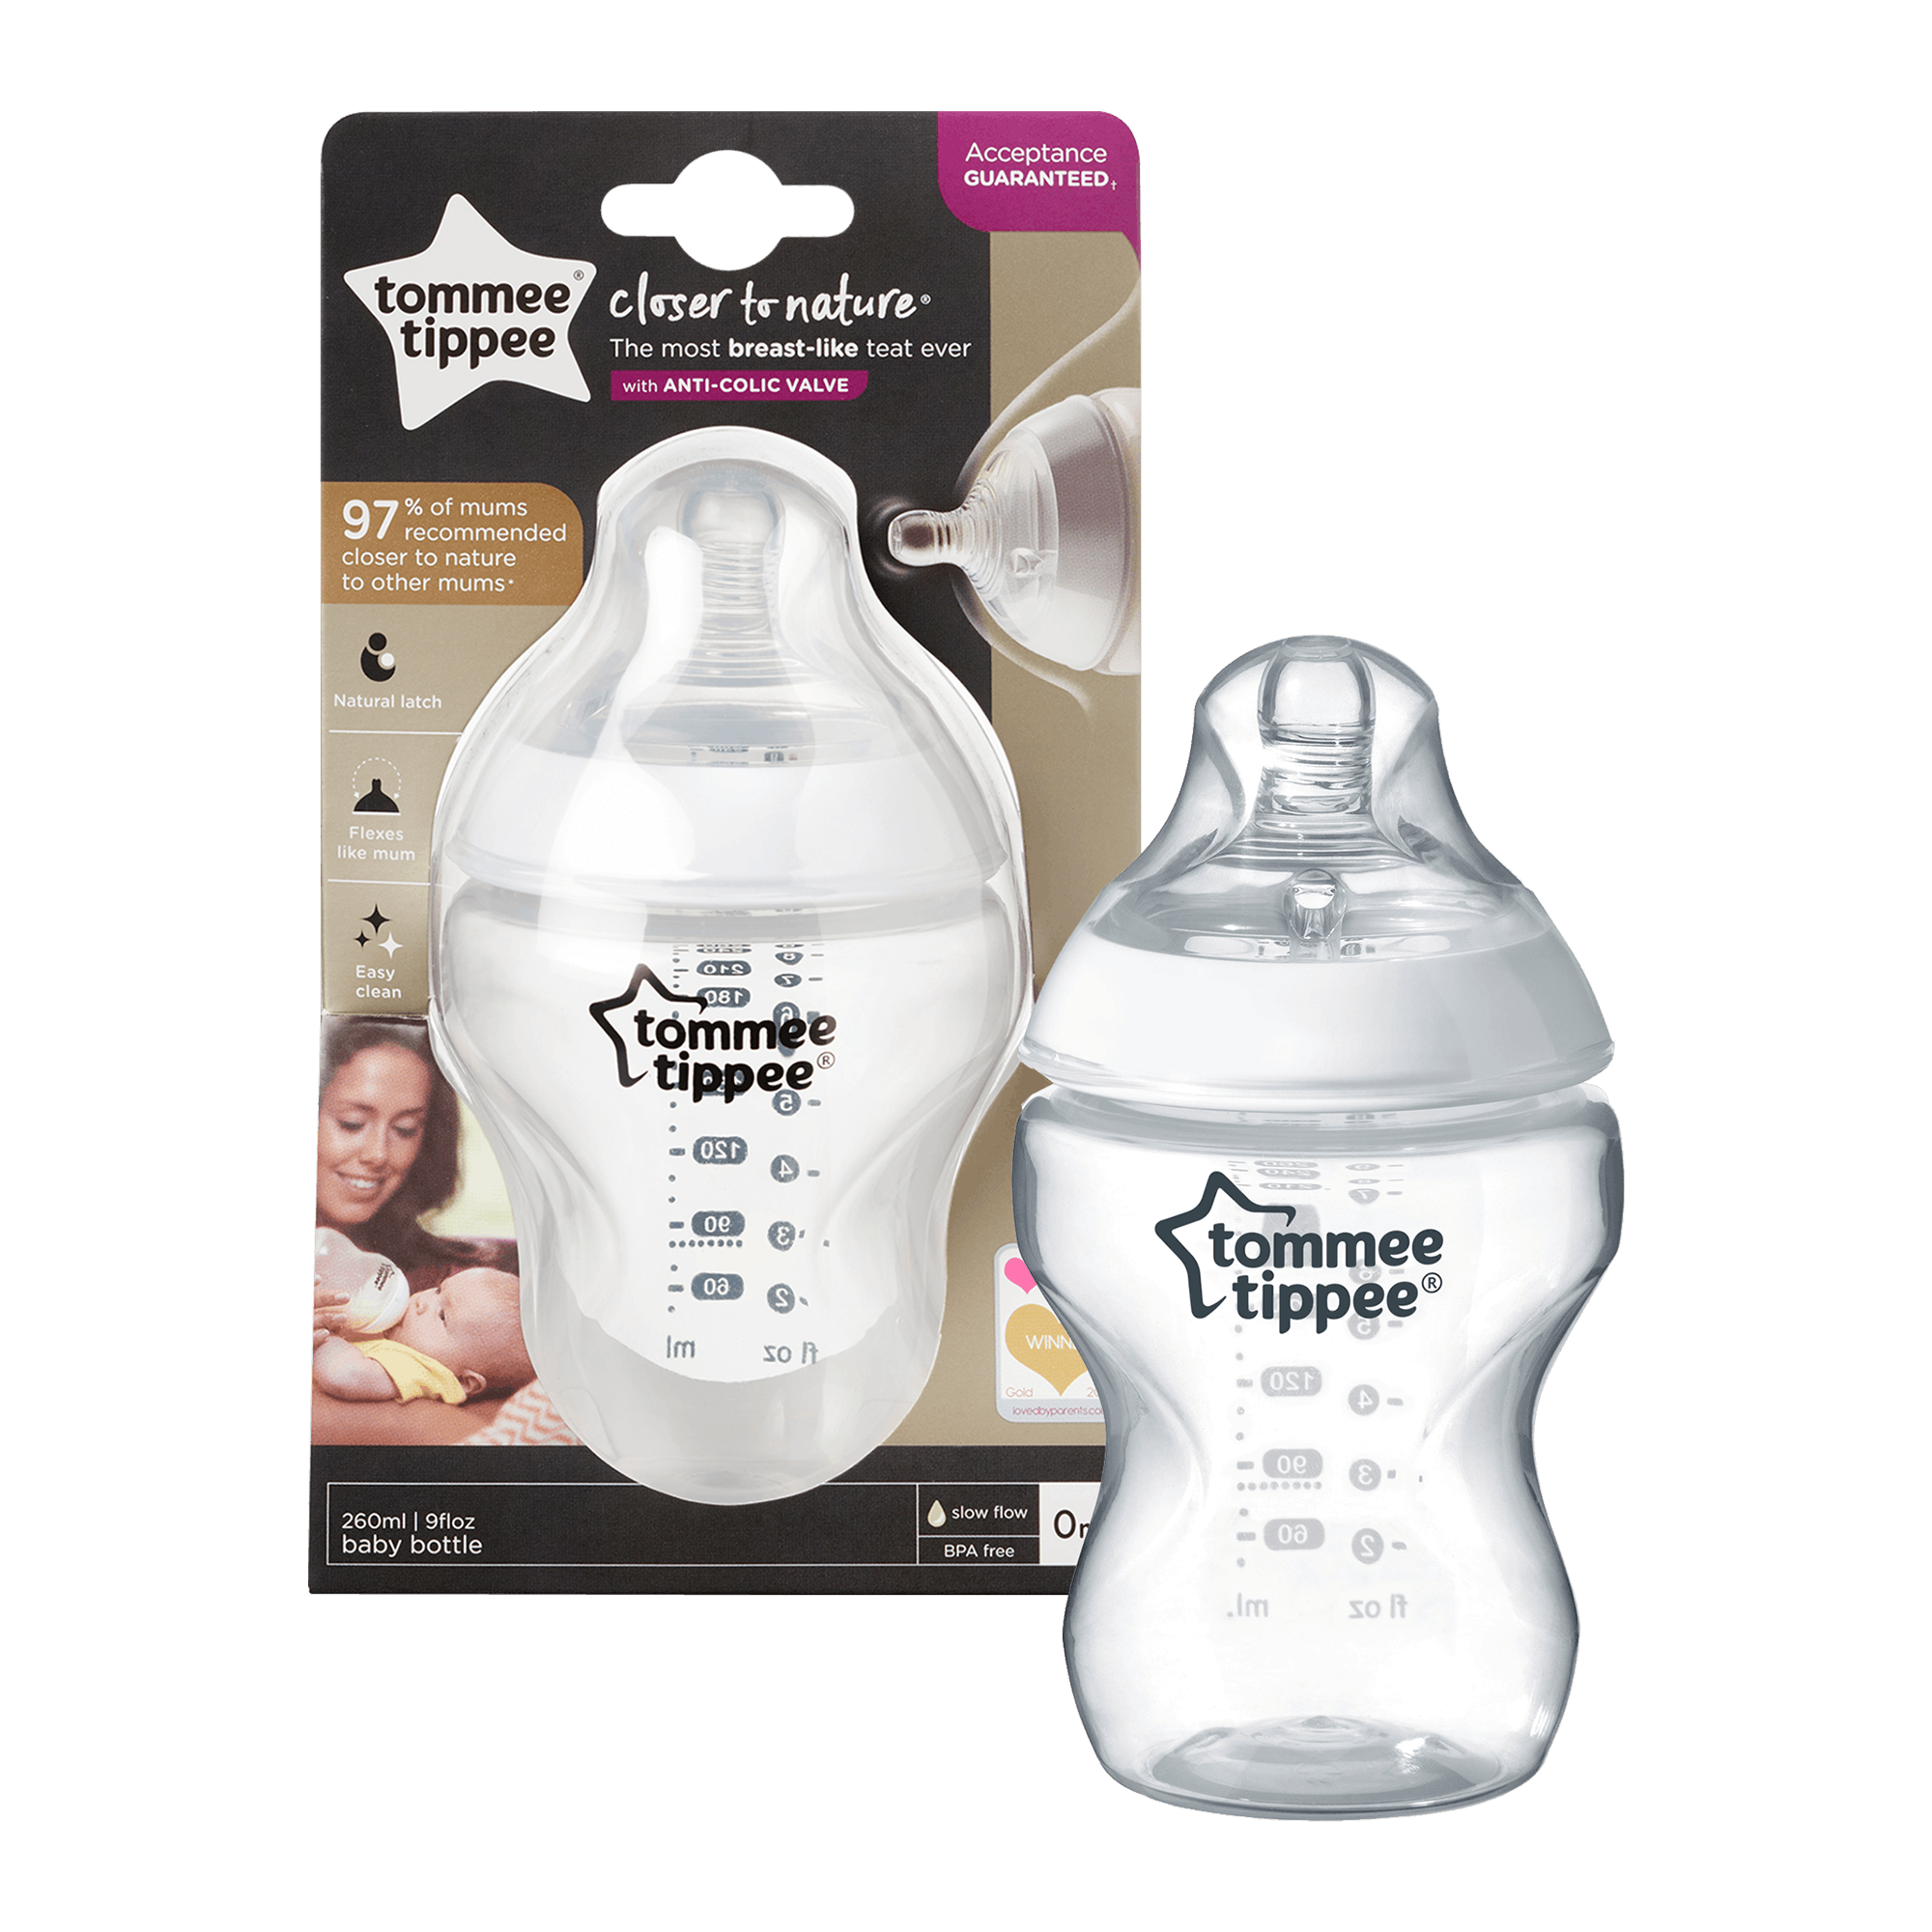 https://images.bauerhosting.com/affiliates/sites/12/motherandbaby/legacy/root/closer-to-nature-bottle.png?ar=16%3A9&fit=crop&crop=top&auto=format&w=undefined&q=80